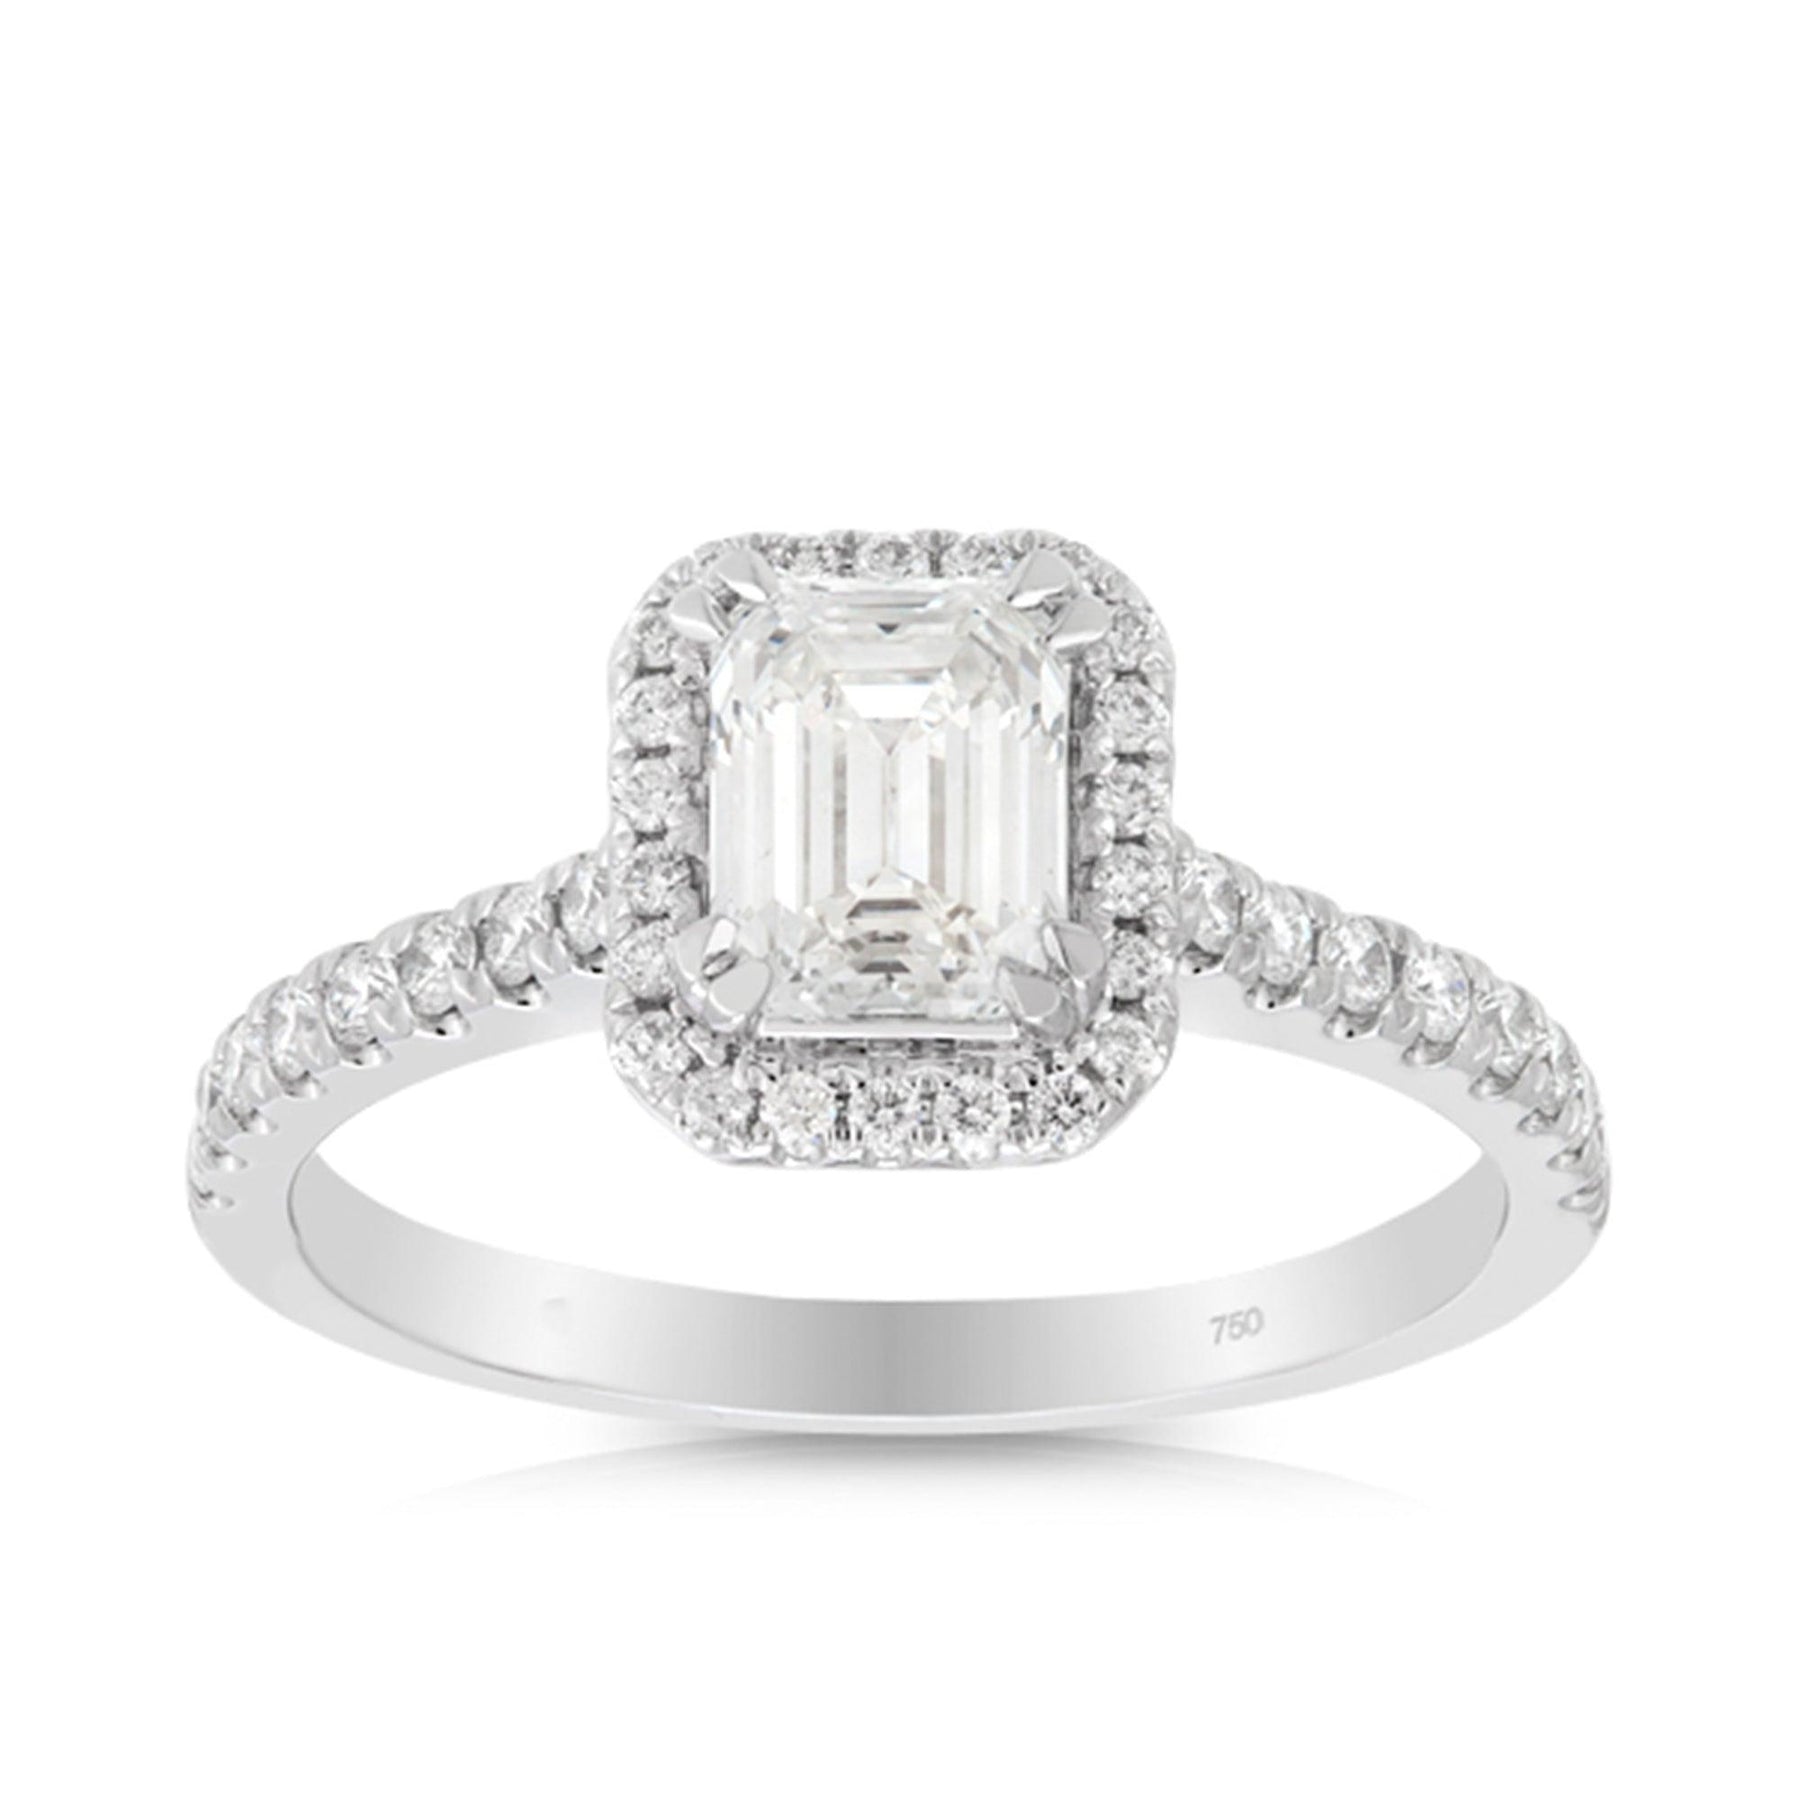 Emerald Cut Diamond Halo Pavé Band Engagement Ring in 18ct White Gold Ring TDW 1.34ct - Wallace Bishop